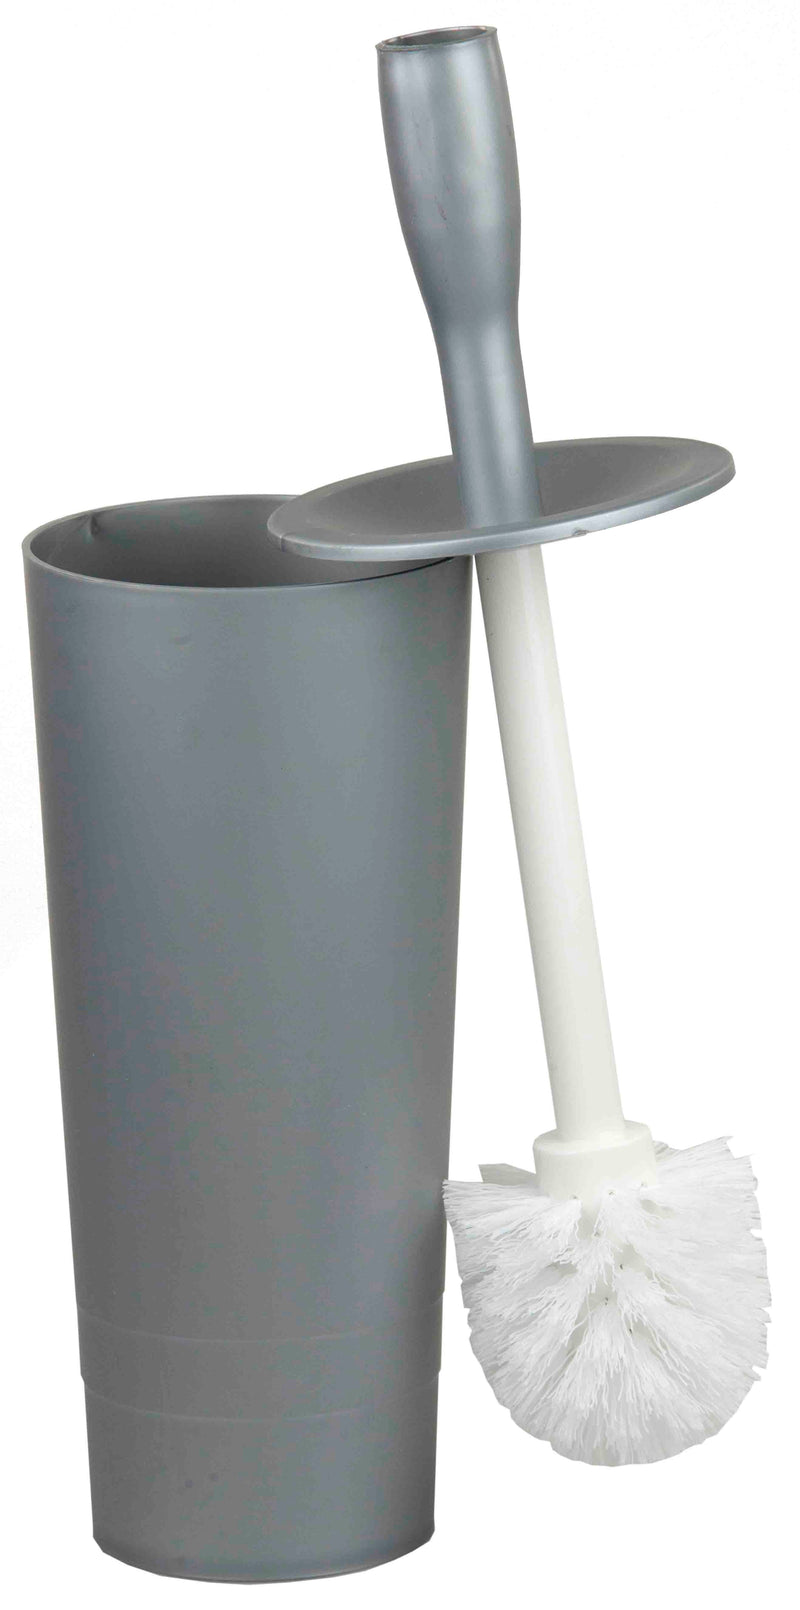 Home Basics Plastic Tapered Toilet Brush And Holder, Gray, 4x15 Inches